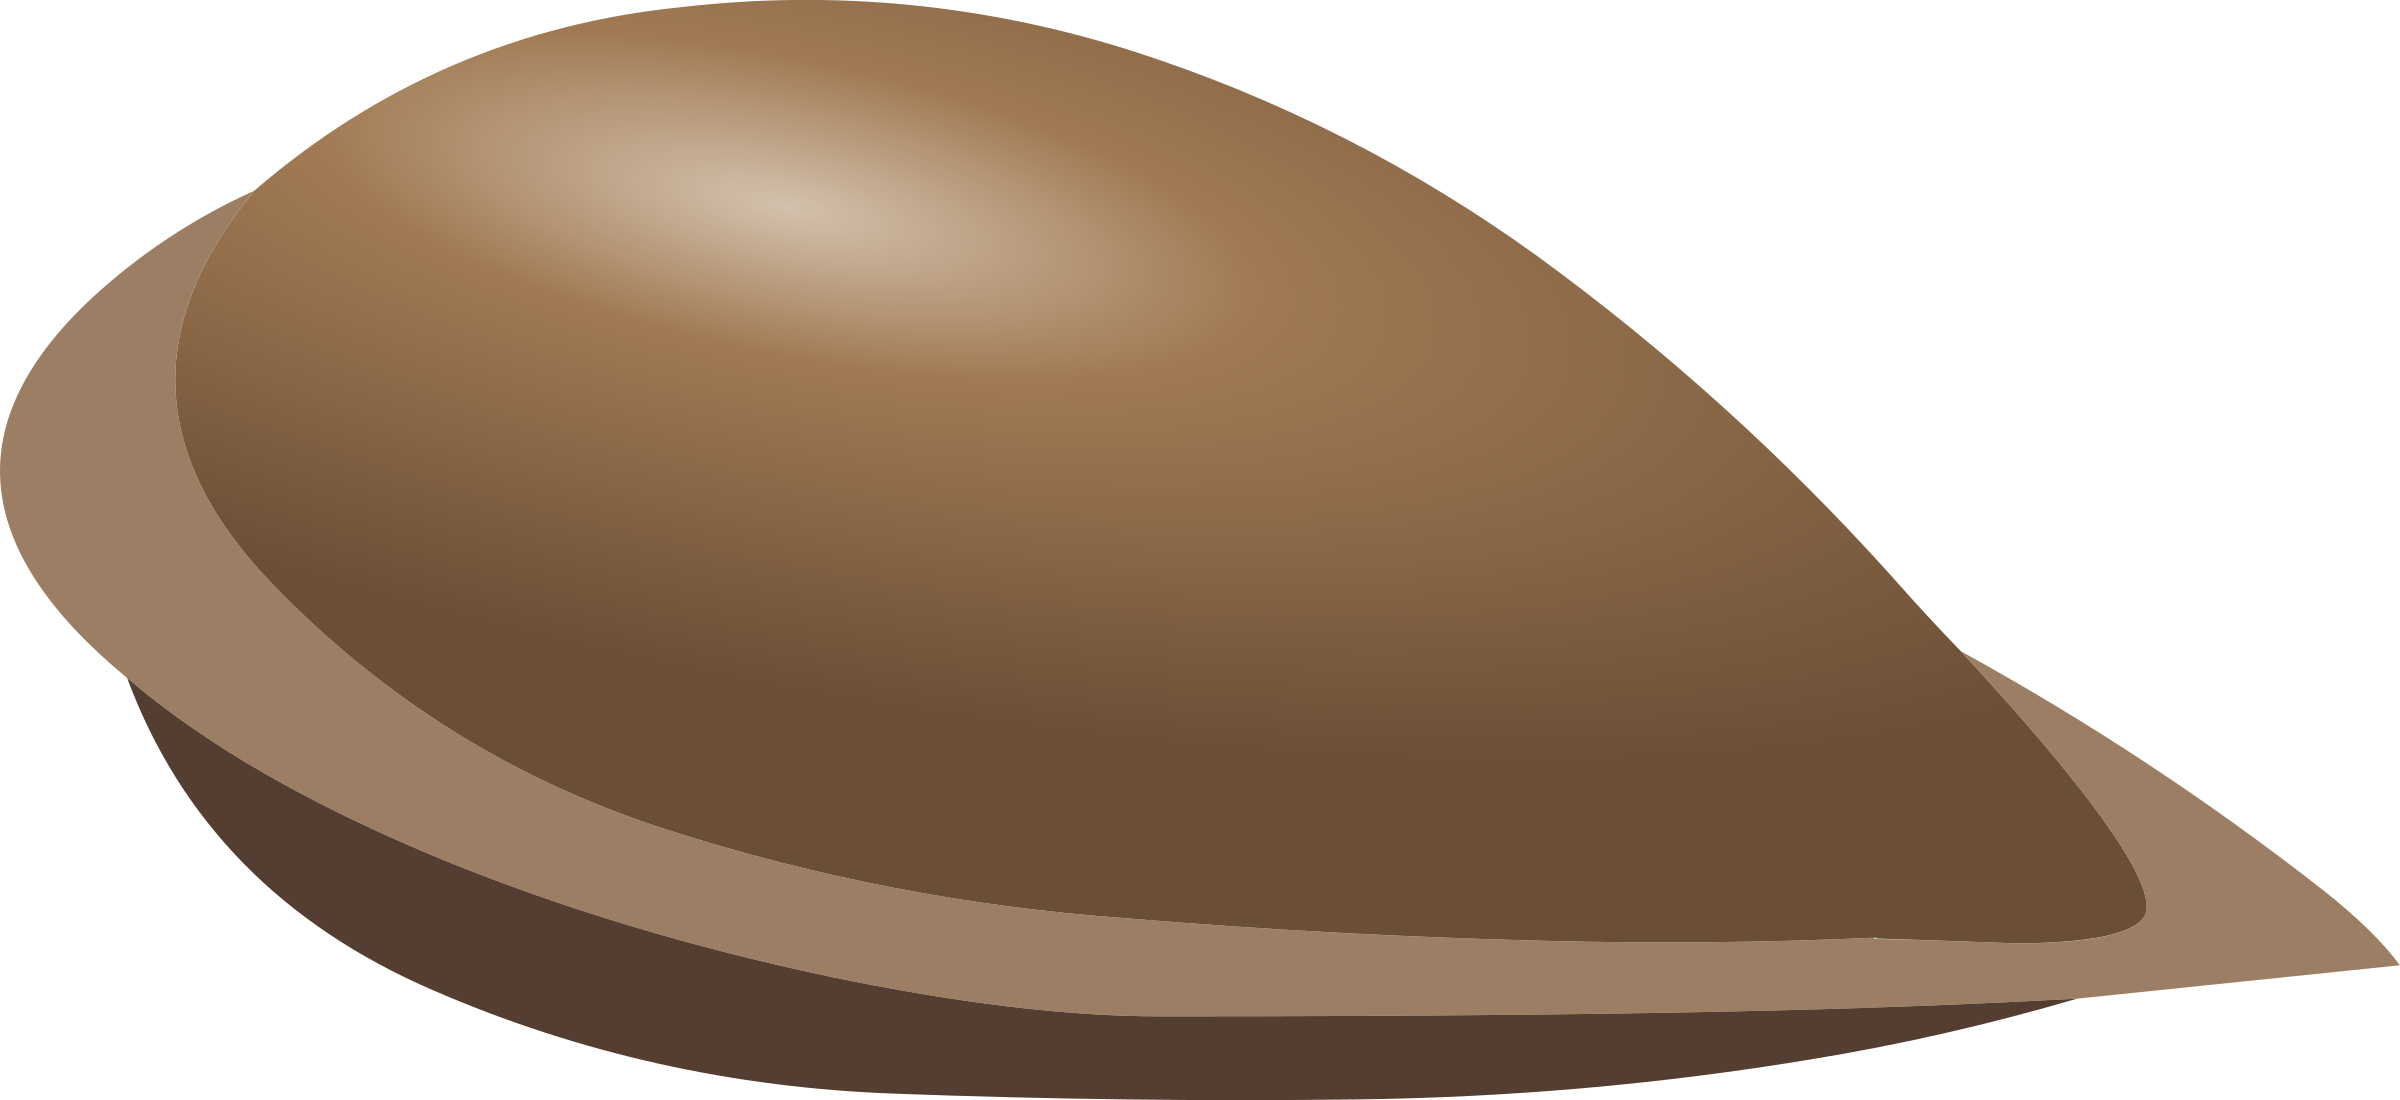 Seed PNG Image